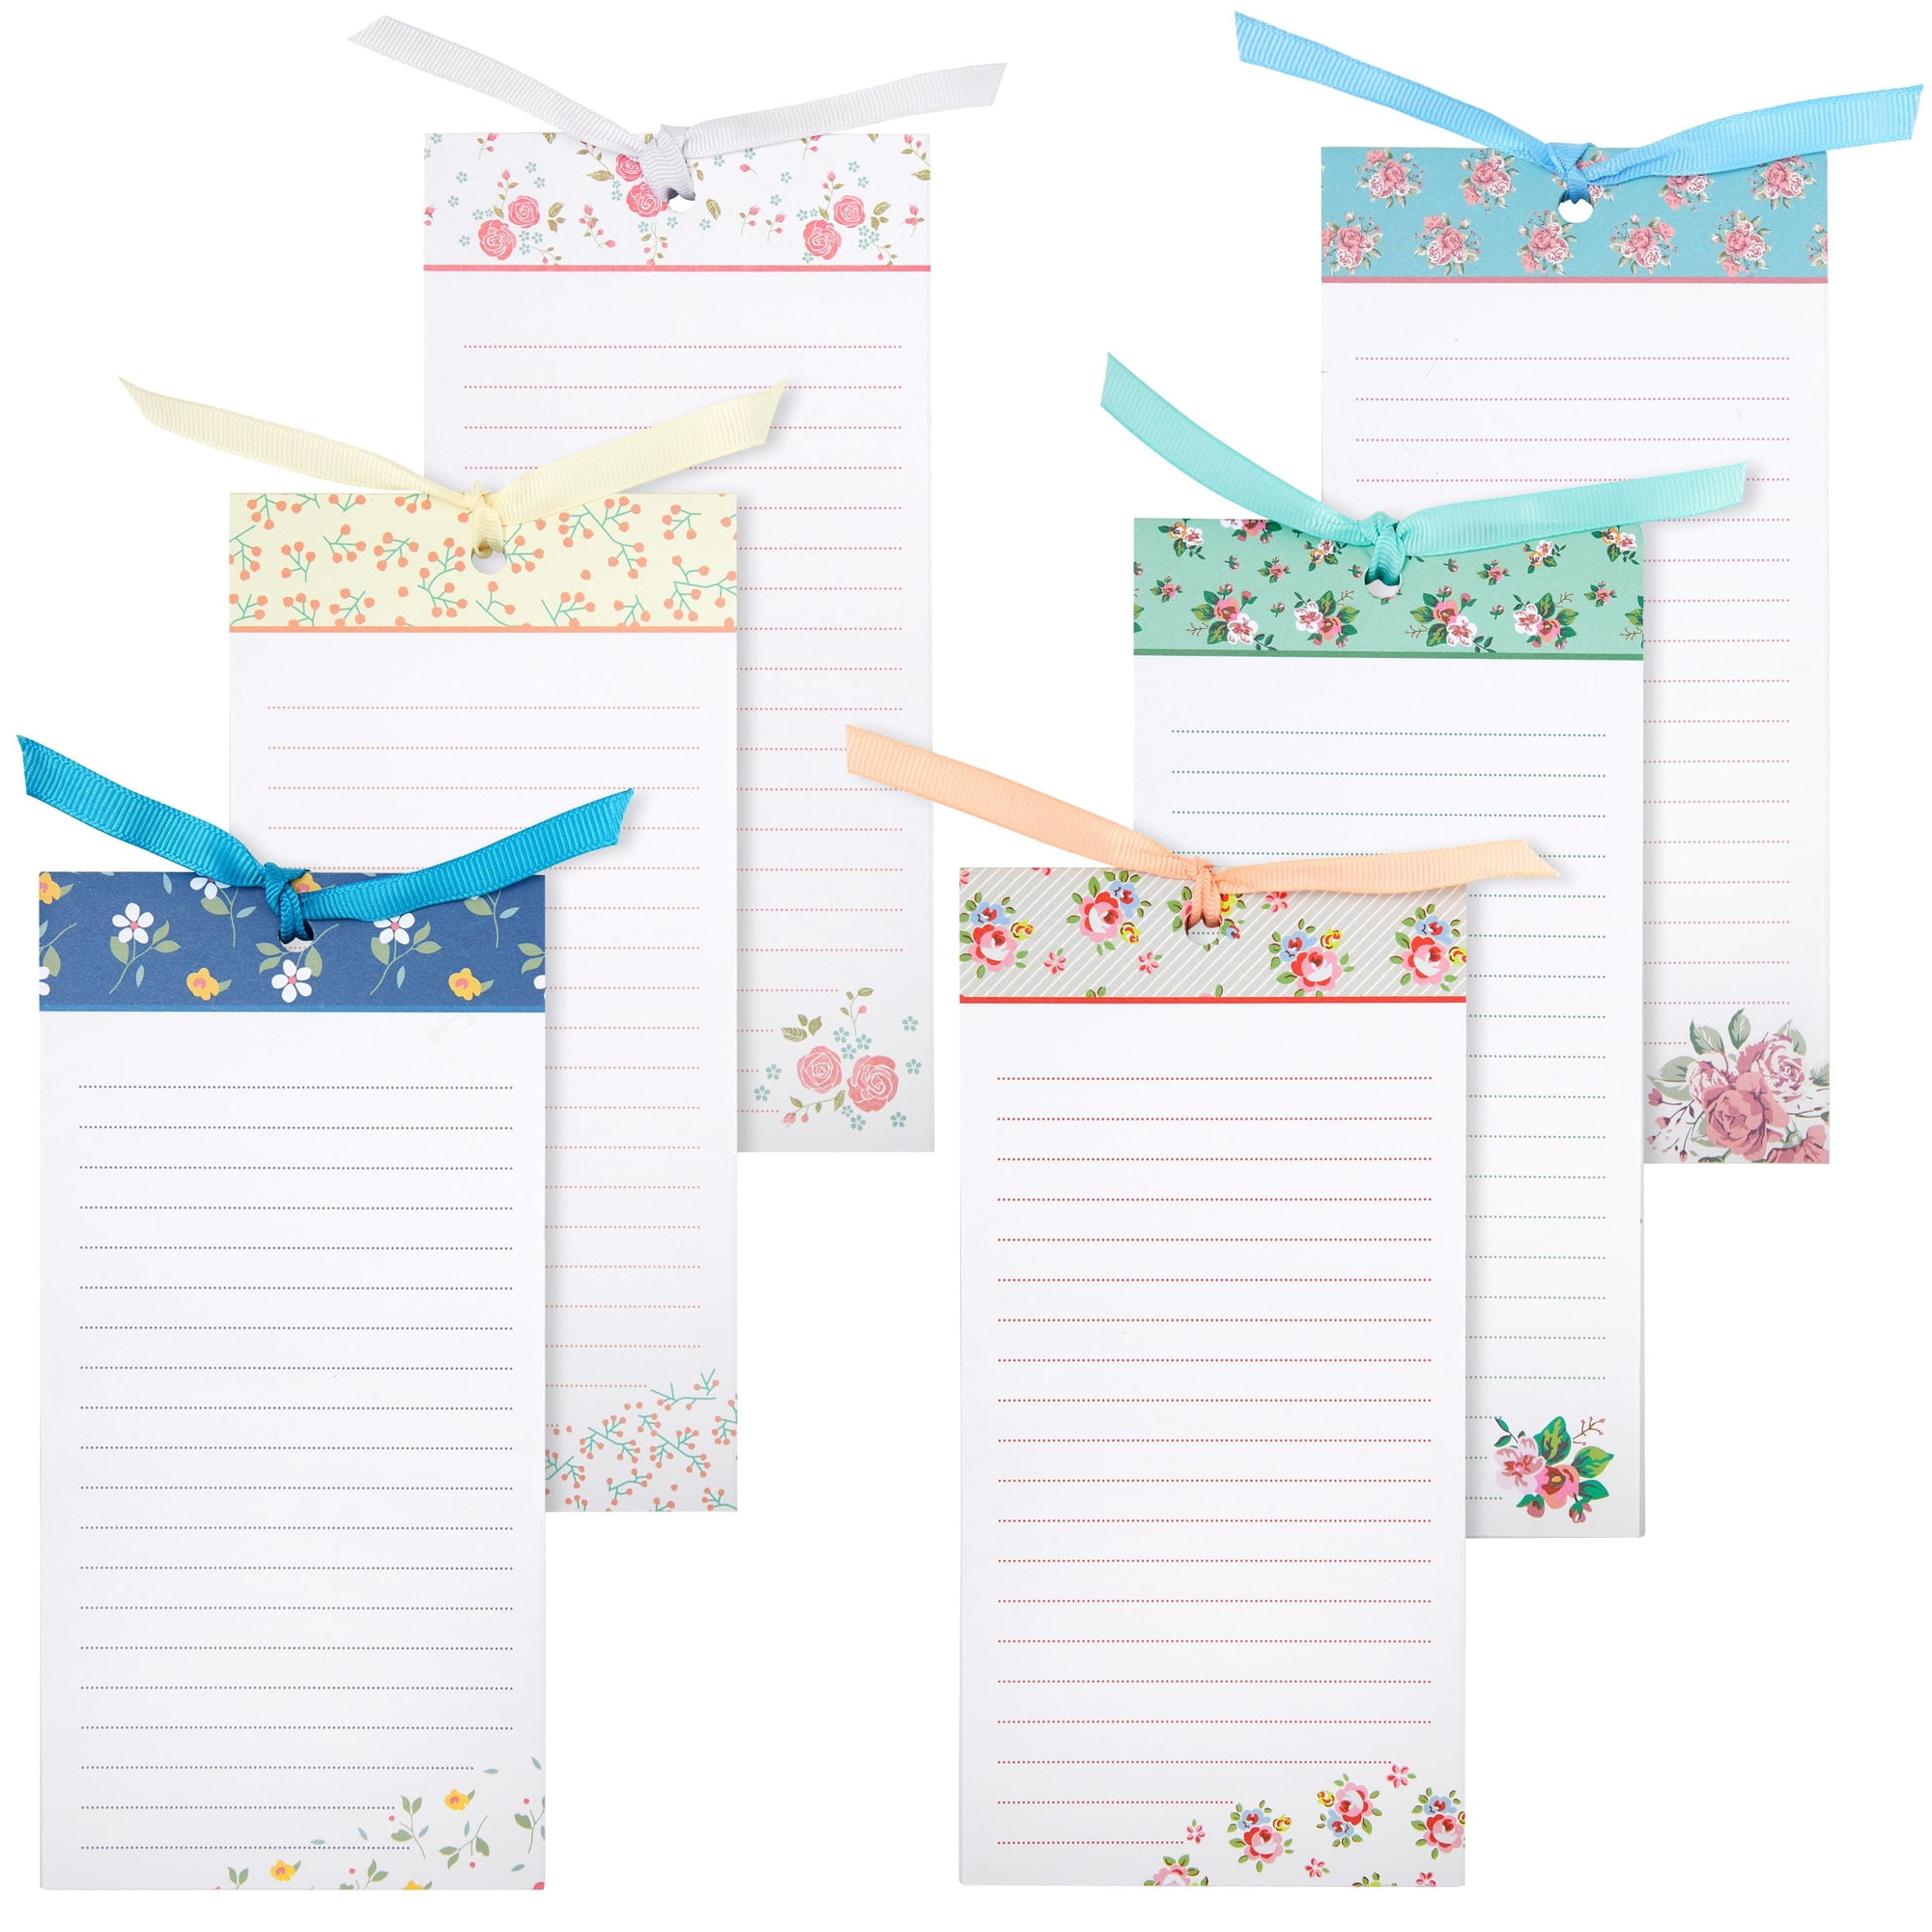 3pcs Compact Note Pads Multi-function Coil Notepads Household Writing Pads Record Supply